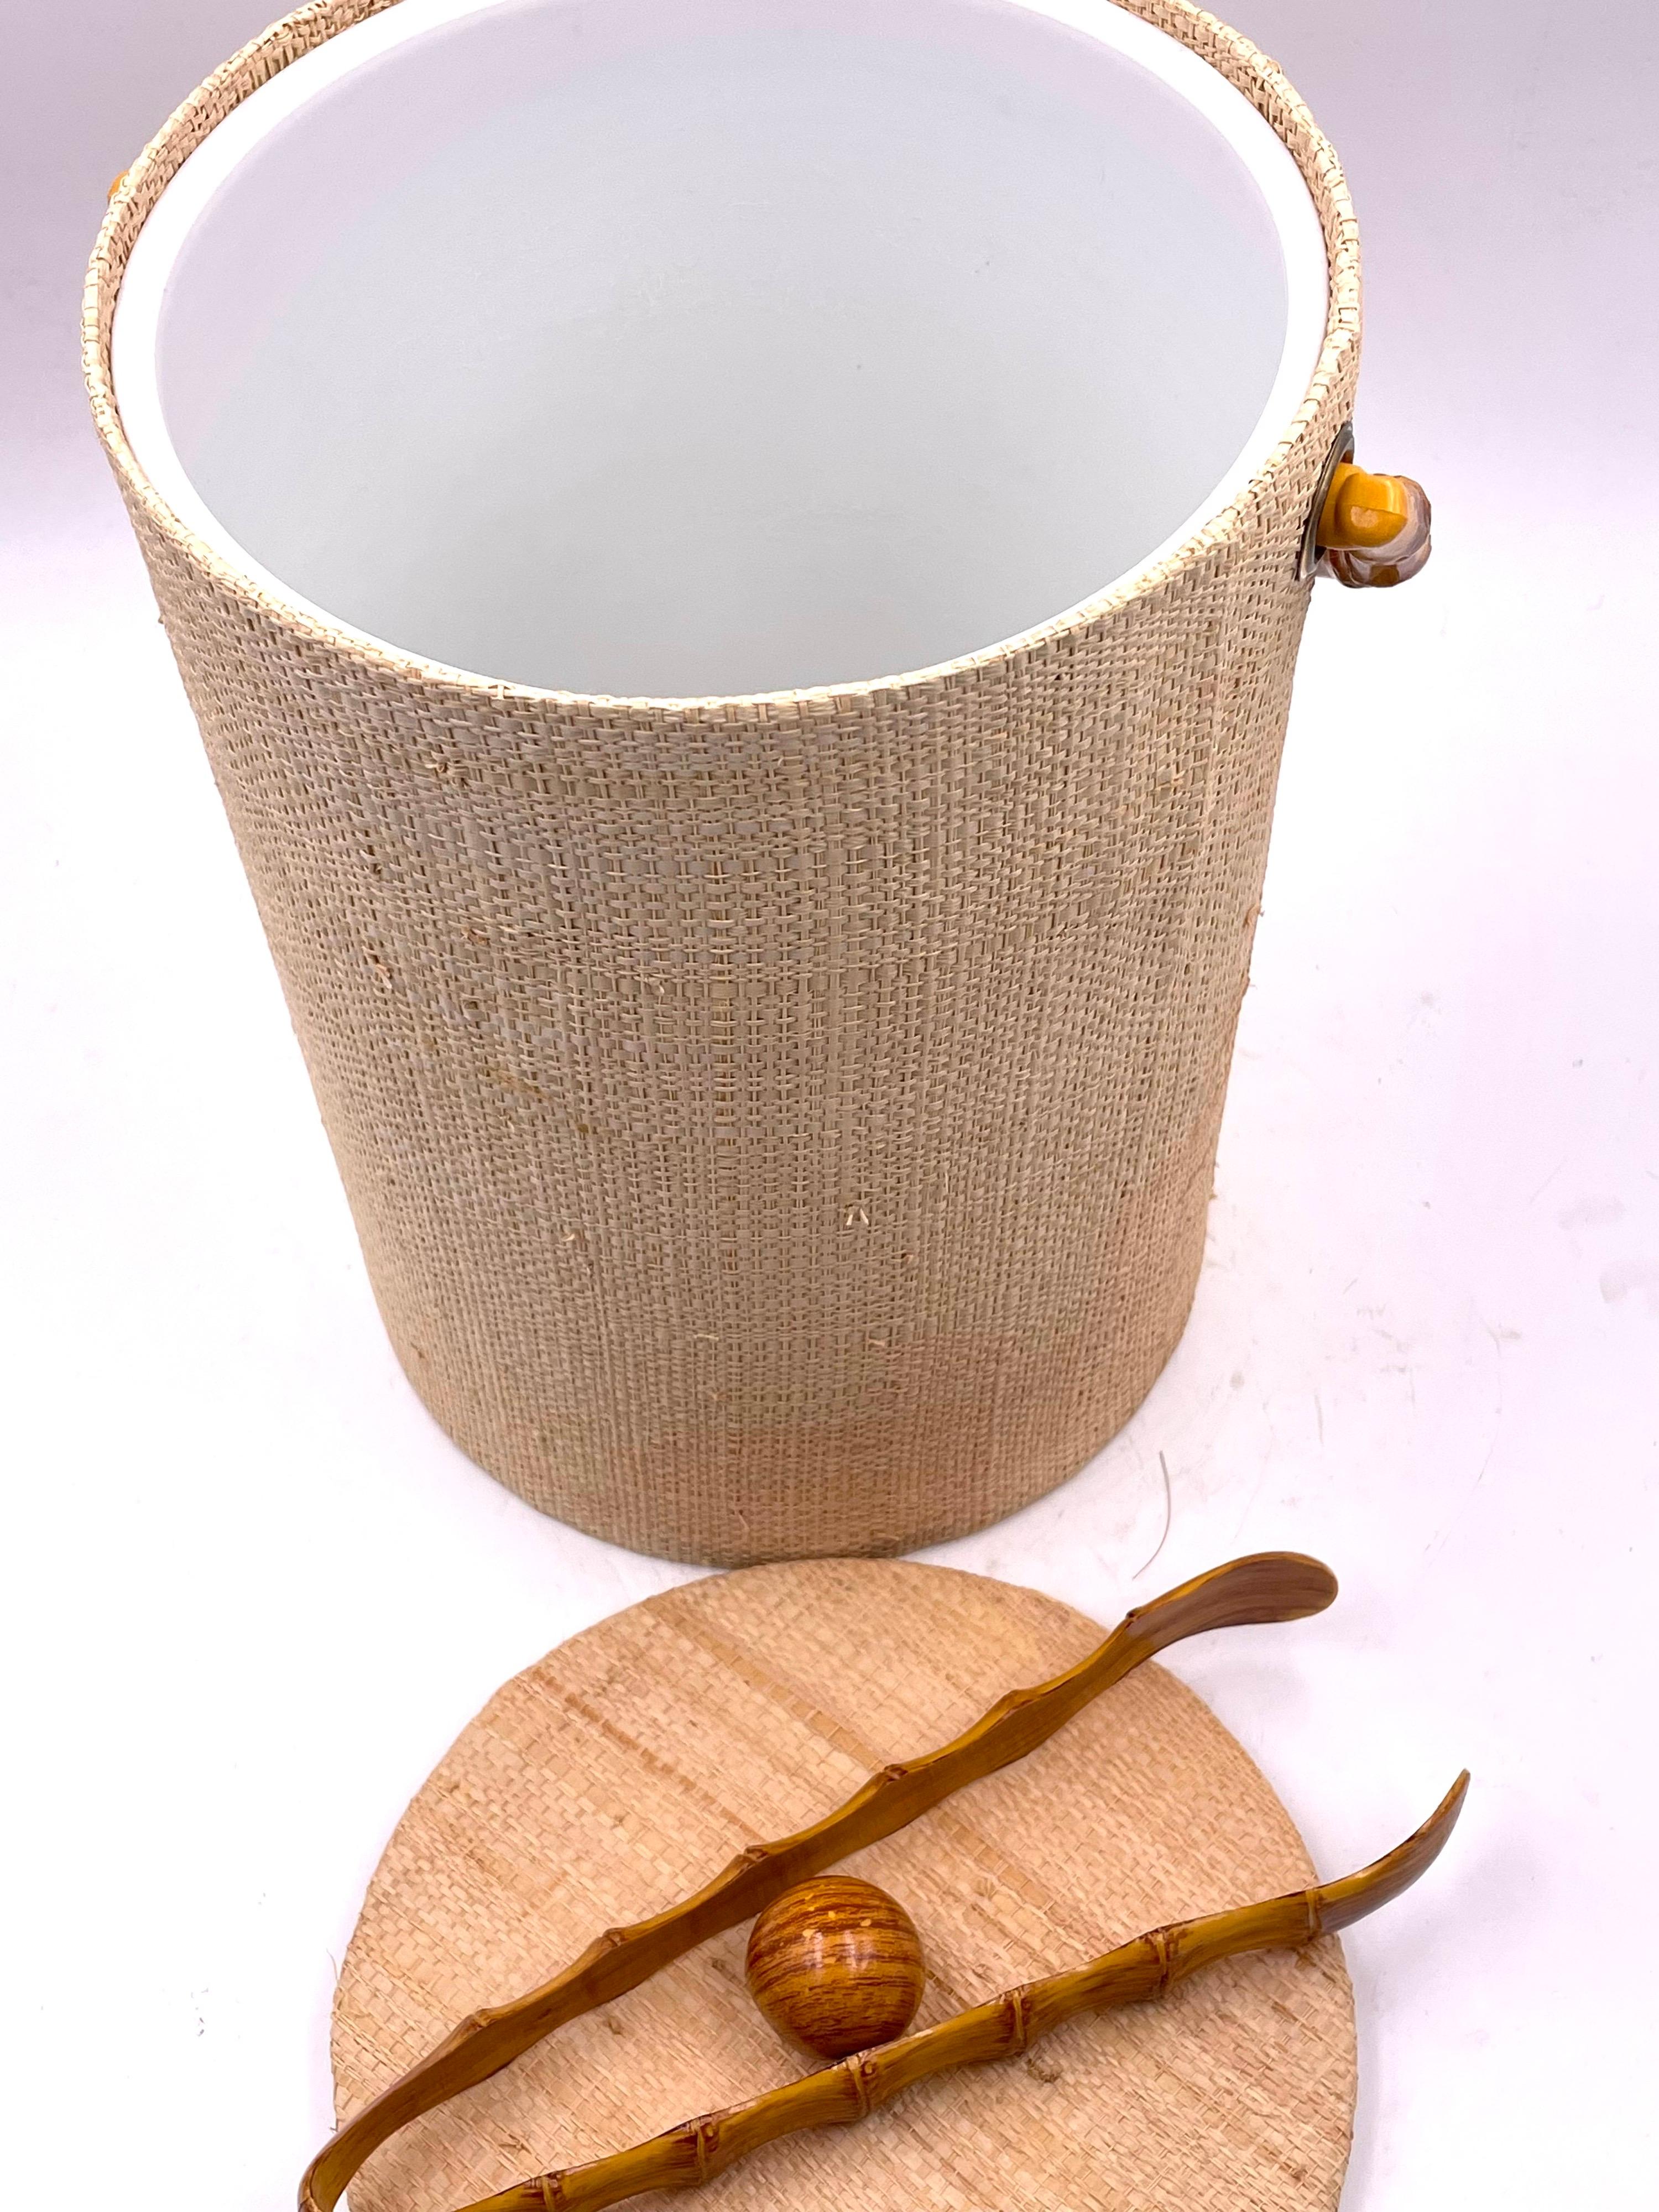 North American Hollywood Regency Grasscloth & Faux Bamboo Ice Bucket & Tongues